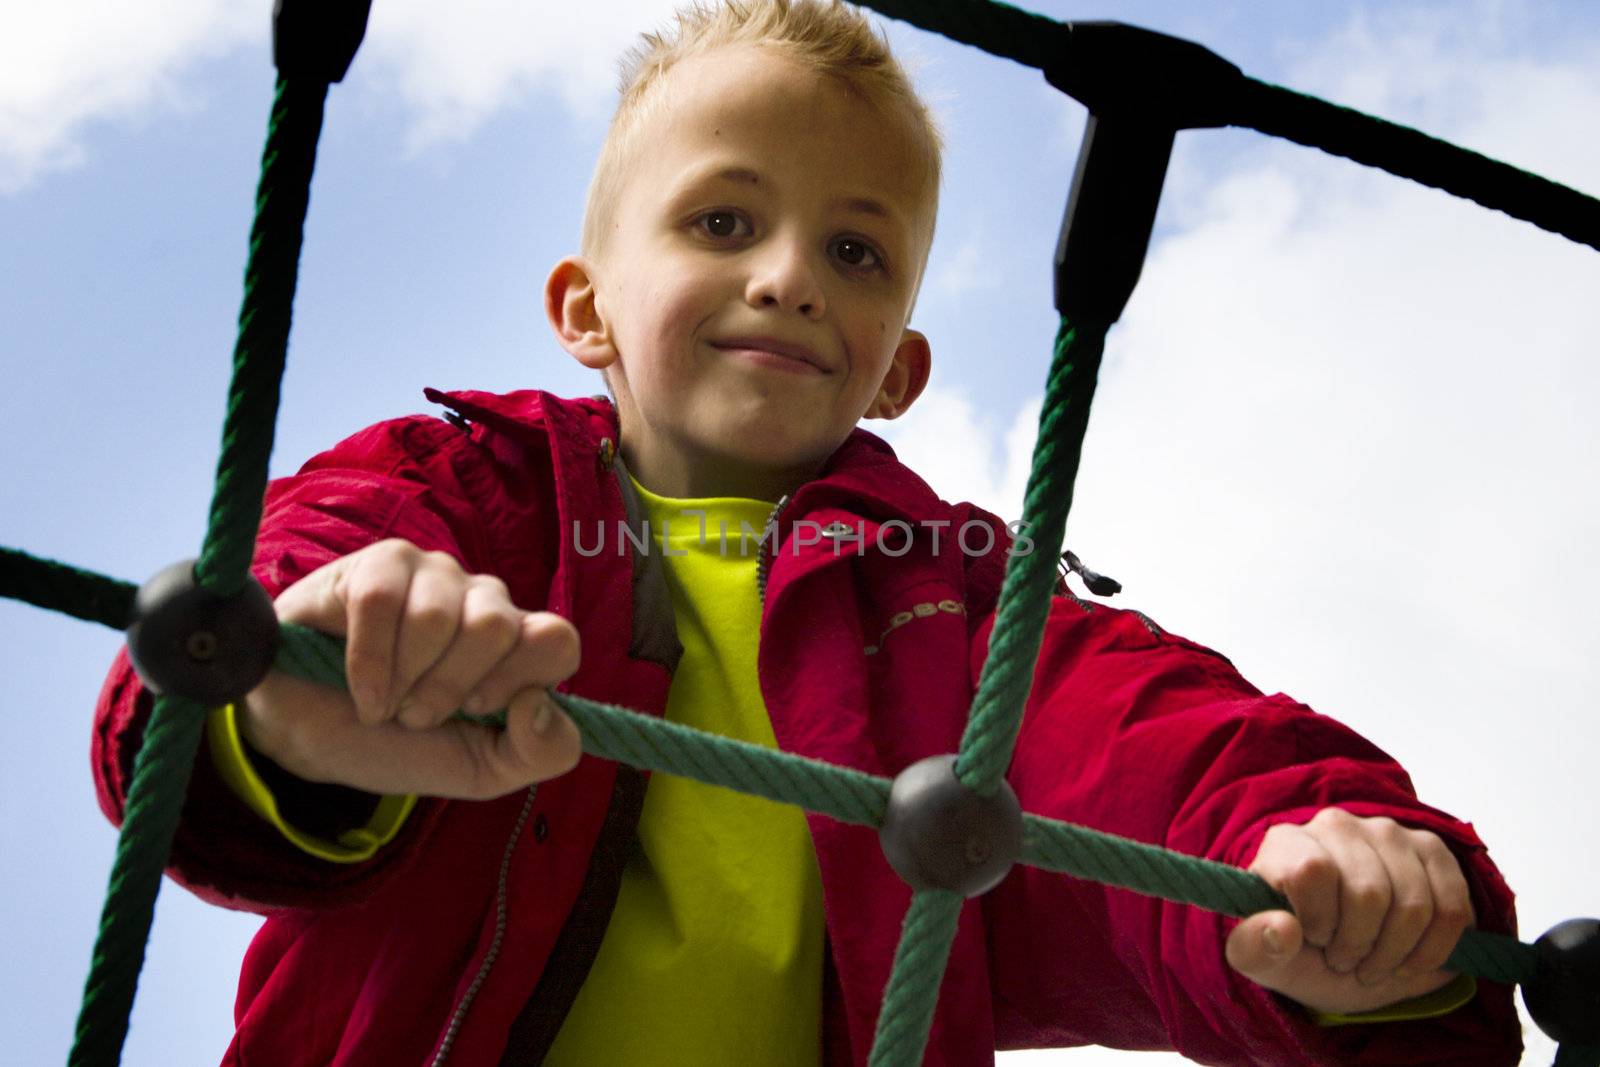 A young boy playing at the playground.